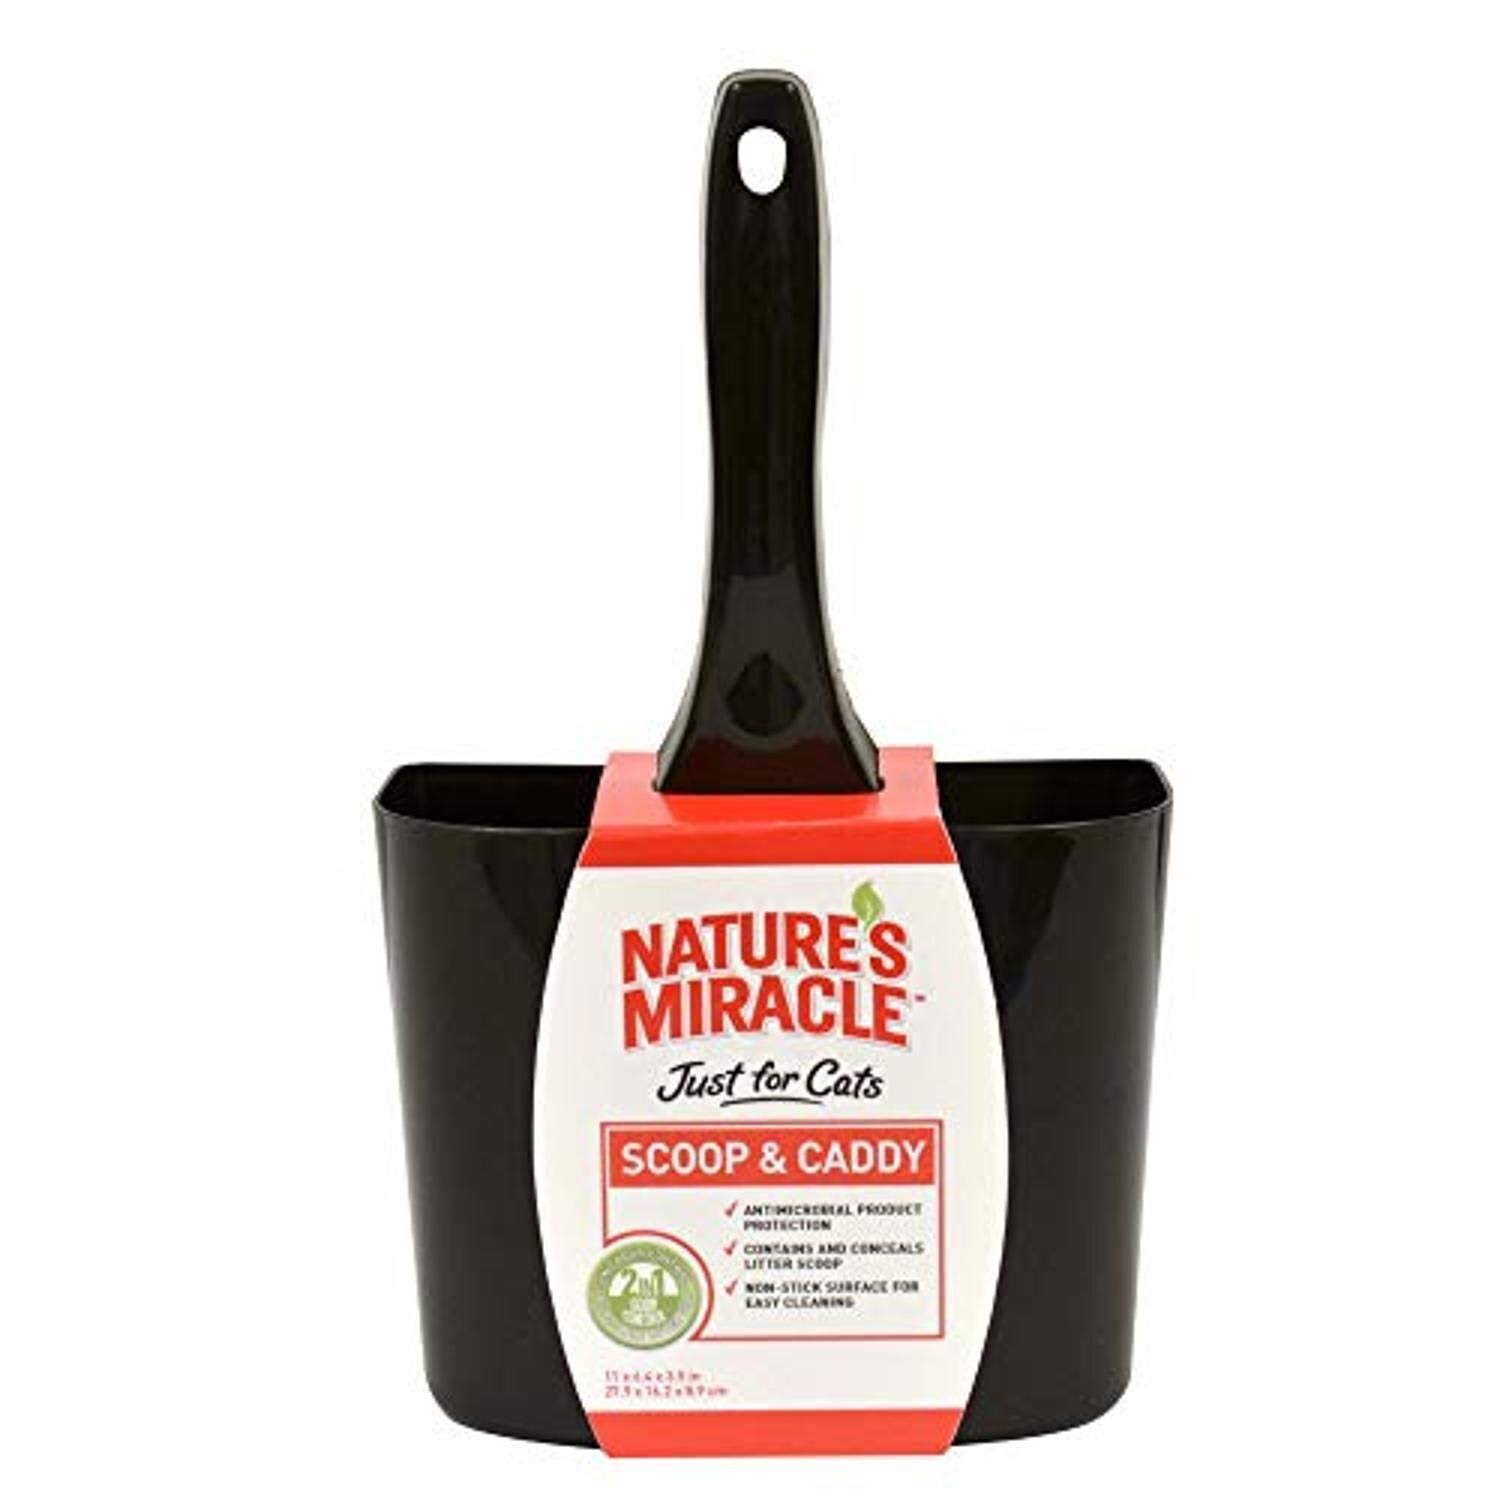 Natures Miracle Scoop & Caddy